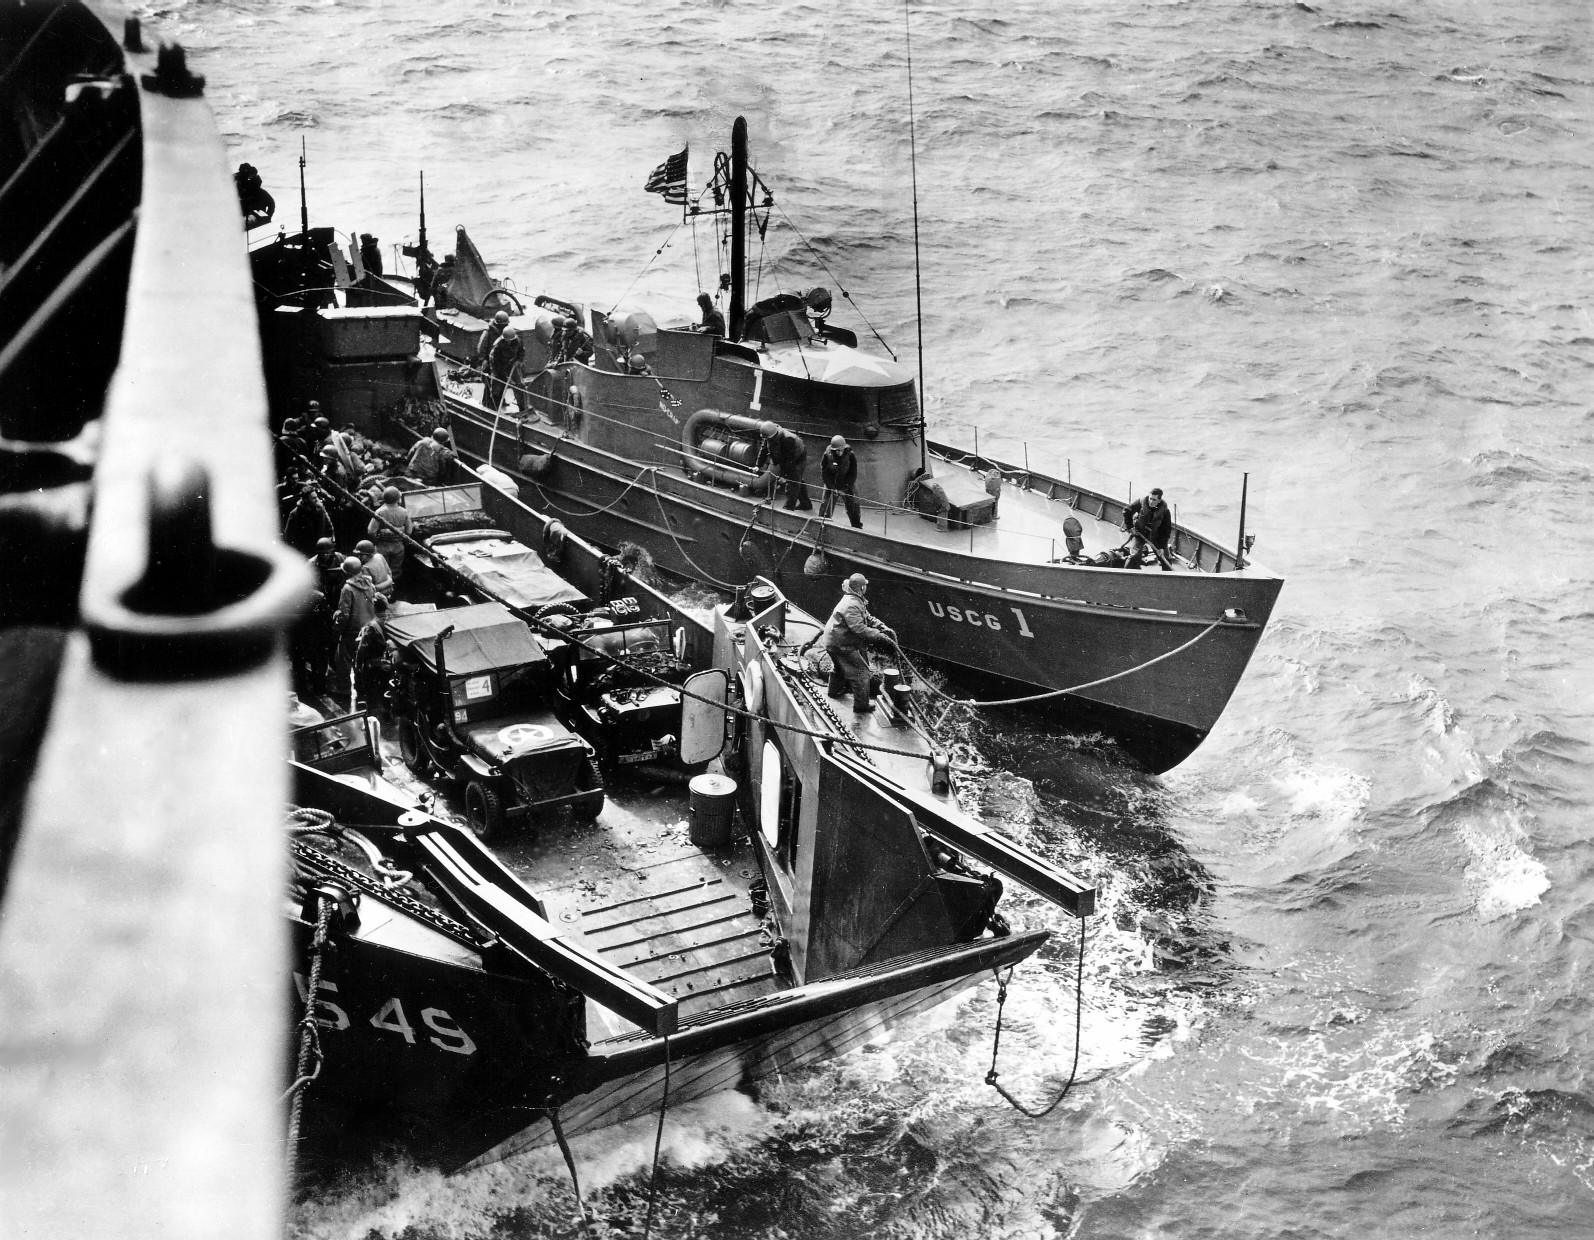 A LCT and an US Coast Guard-manned boat operating off Normandy, France, Jun 1944; note jeep vehicles onboard the LCT